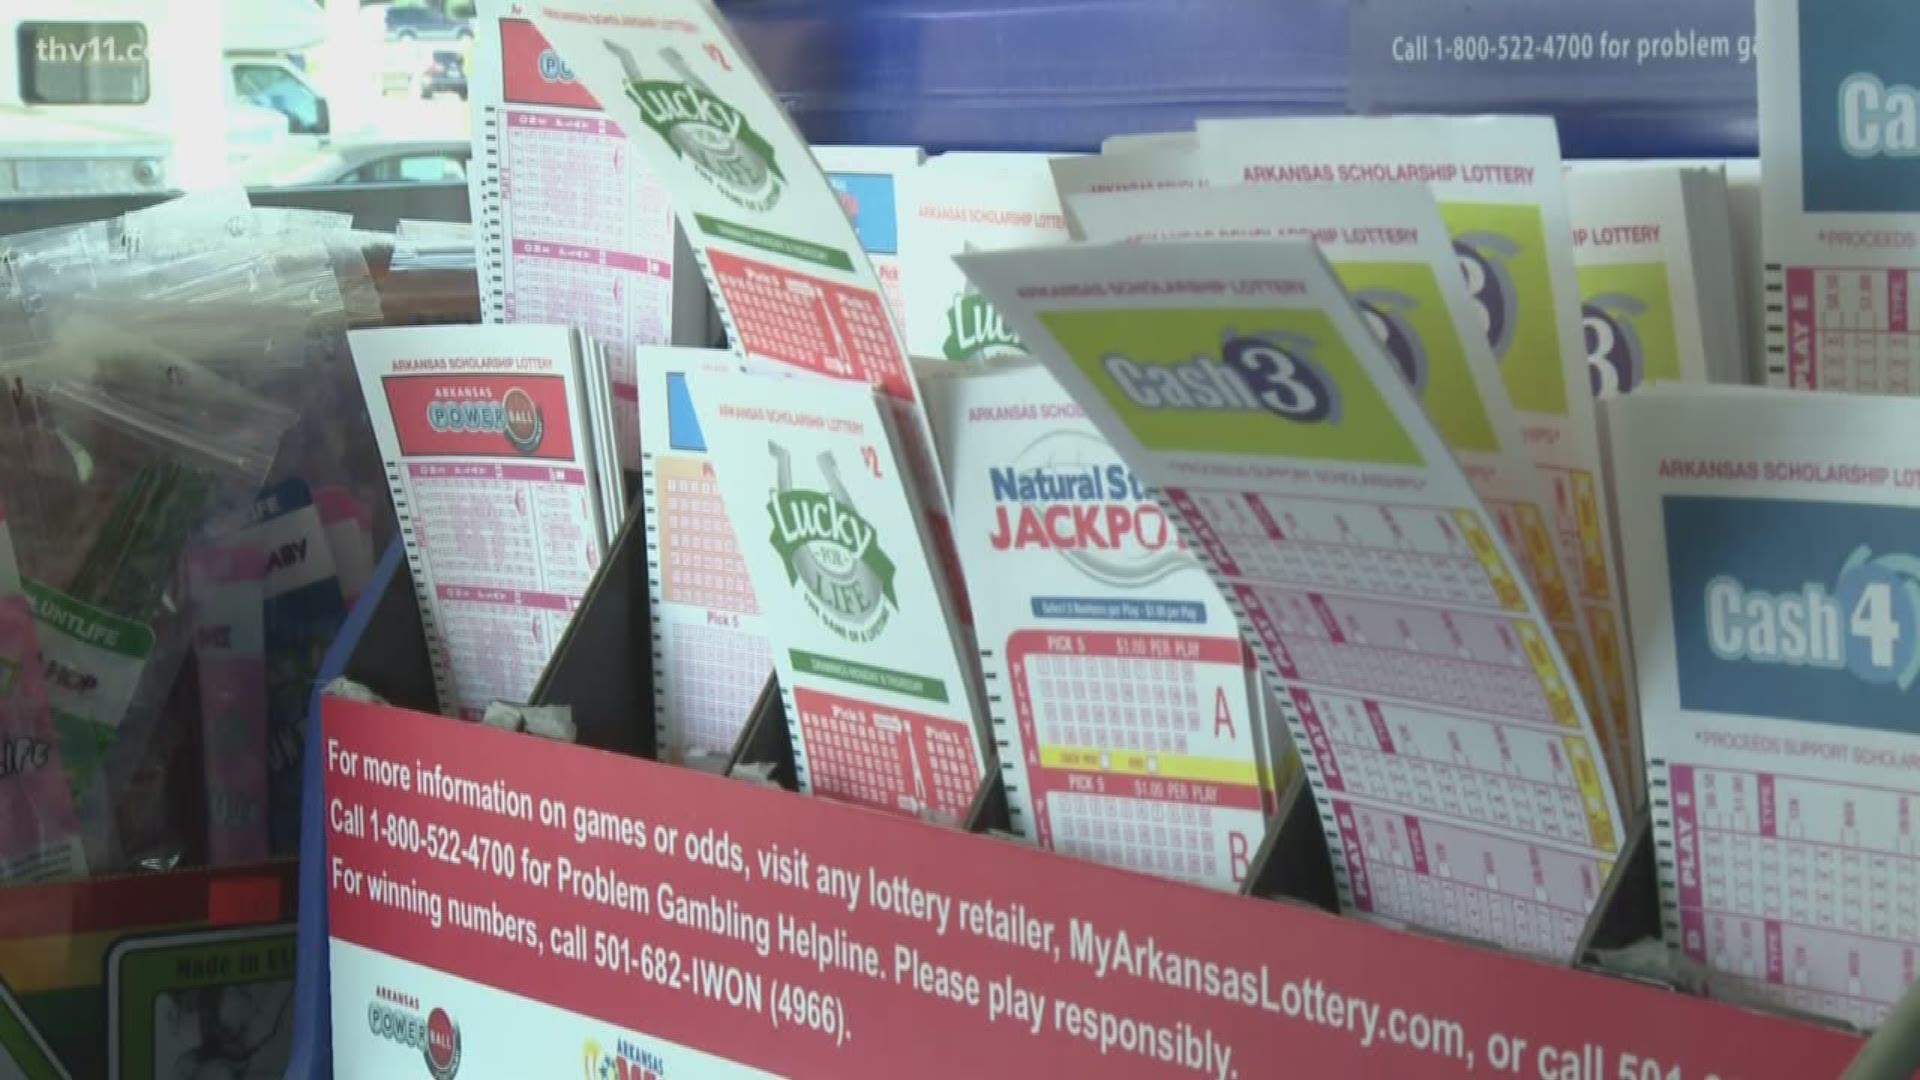 Tonight, the record-breaking Mega Millions jackpot is drawing a crowd here in Arkansas.